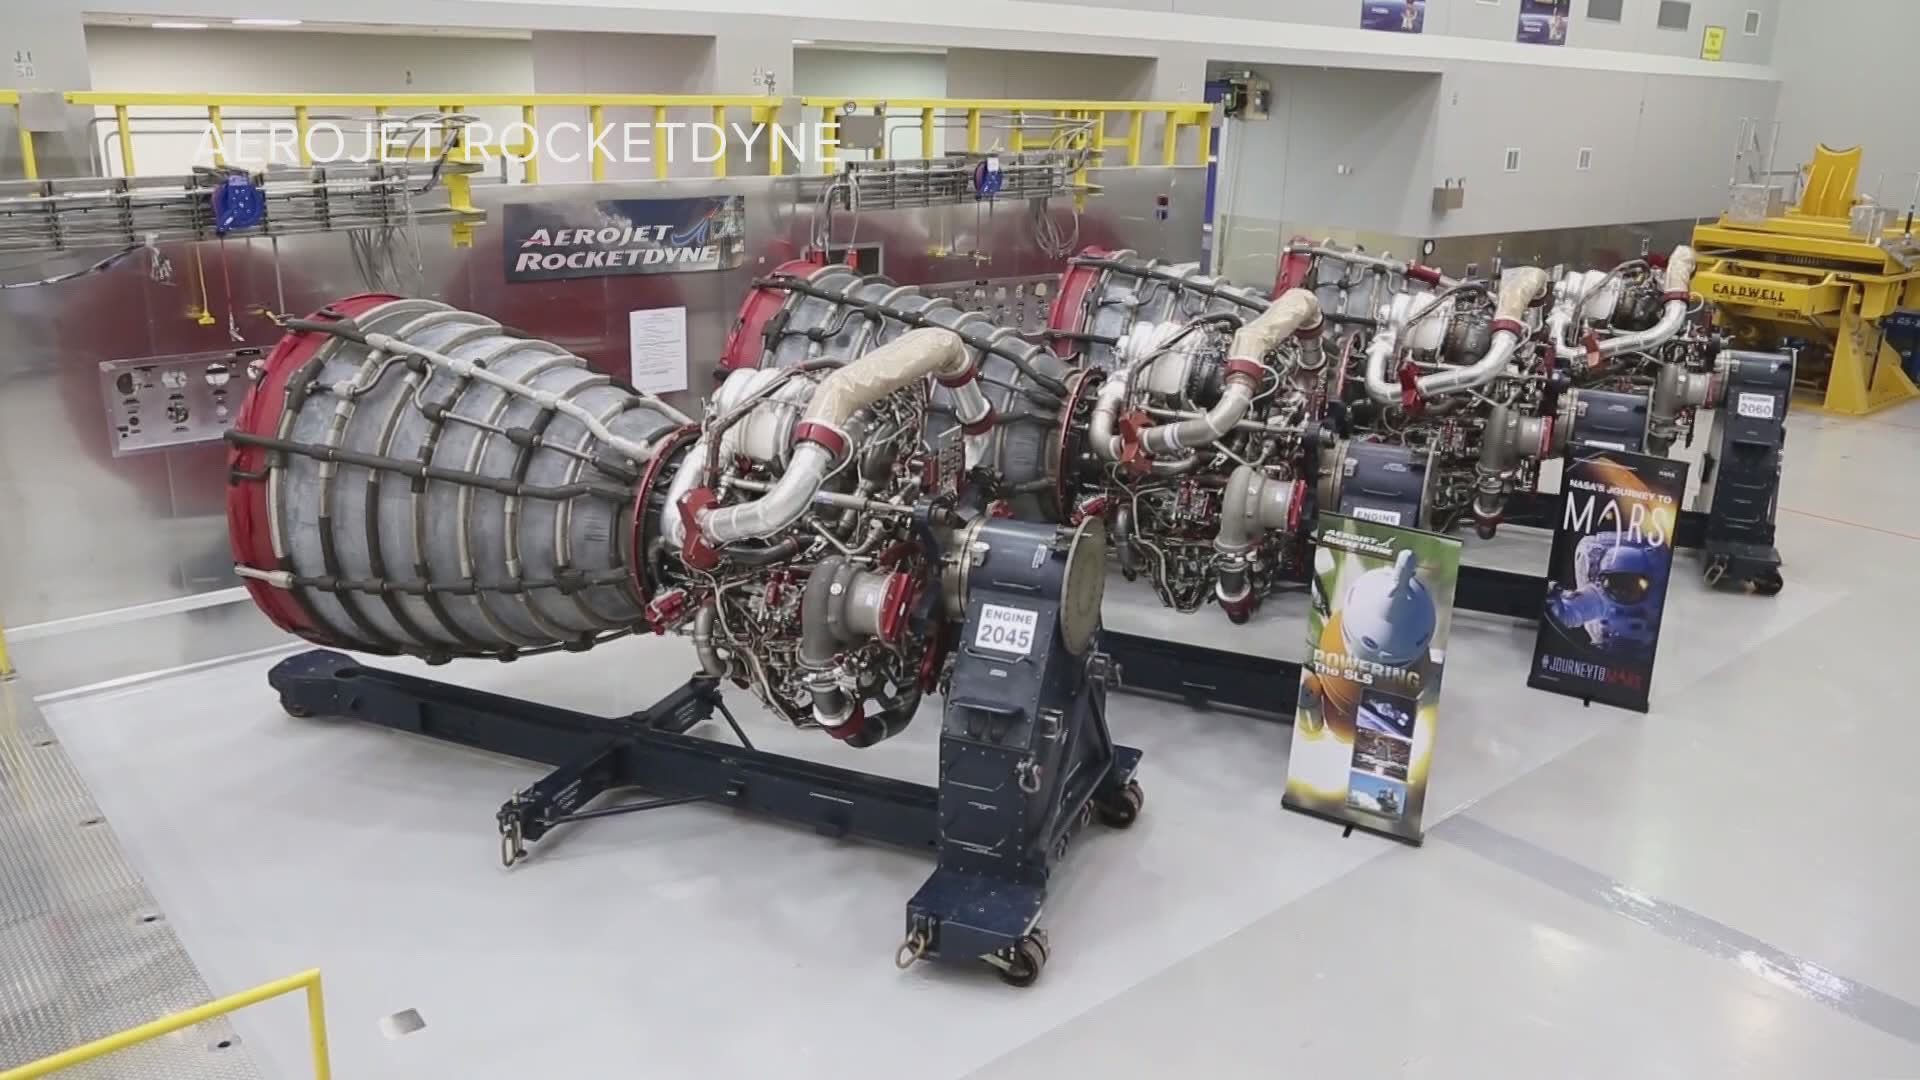 This Saturday, NASA will test the most powerful rocket engines in the world right next door in Mississippi.